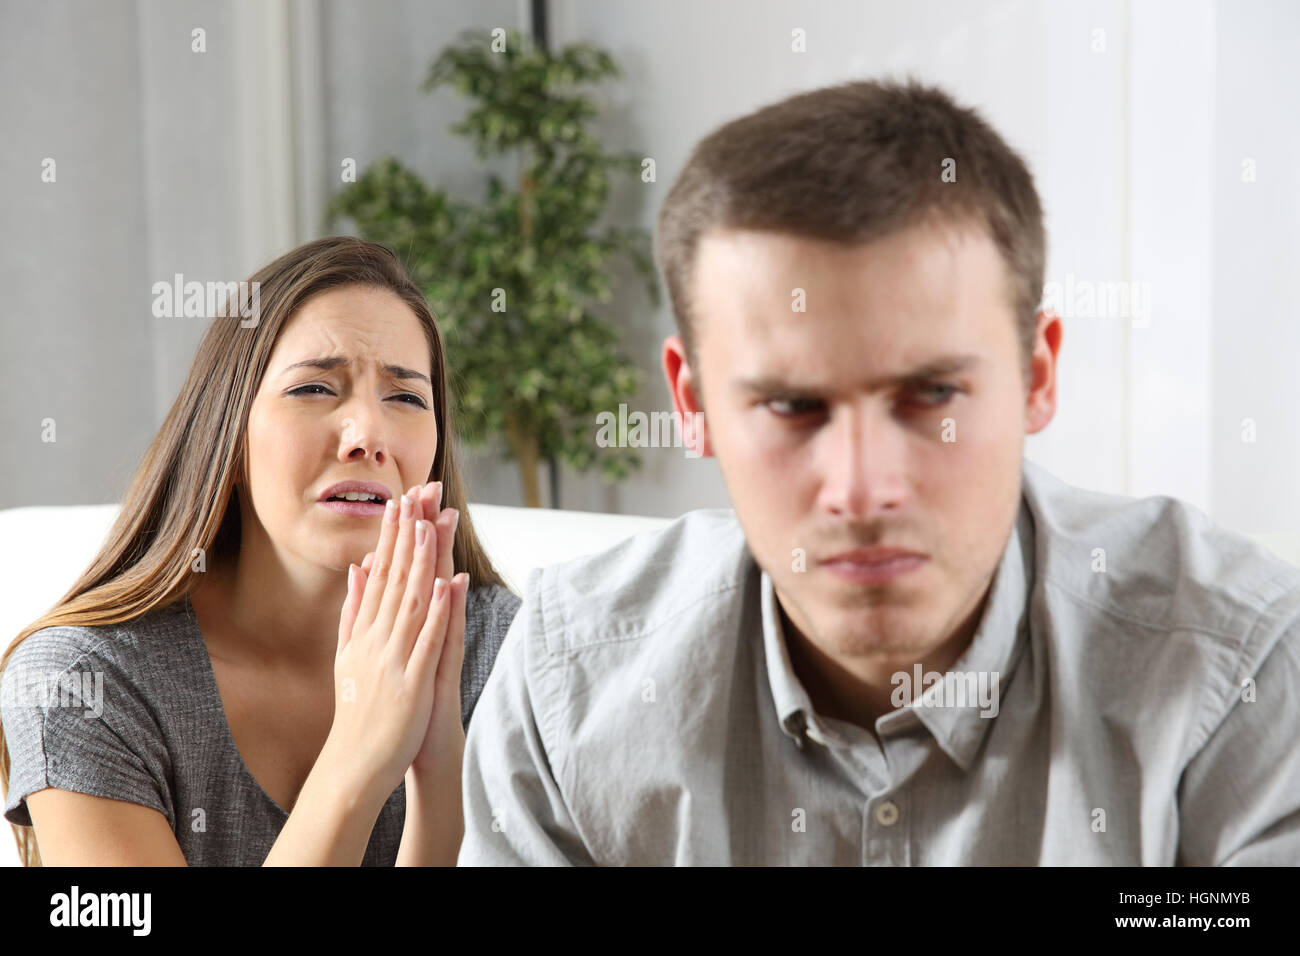 Wife asking for forgiveness to her ex husband after conflict sitting on a couch in the living room of a house Stock Photo